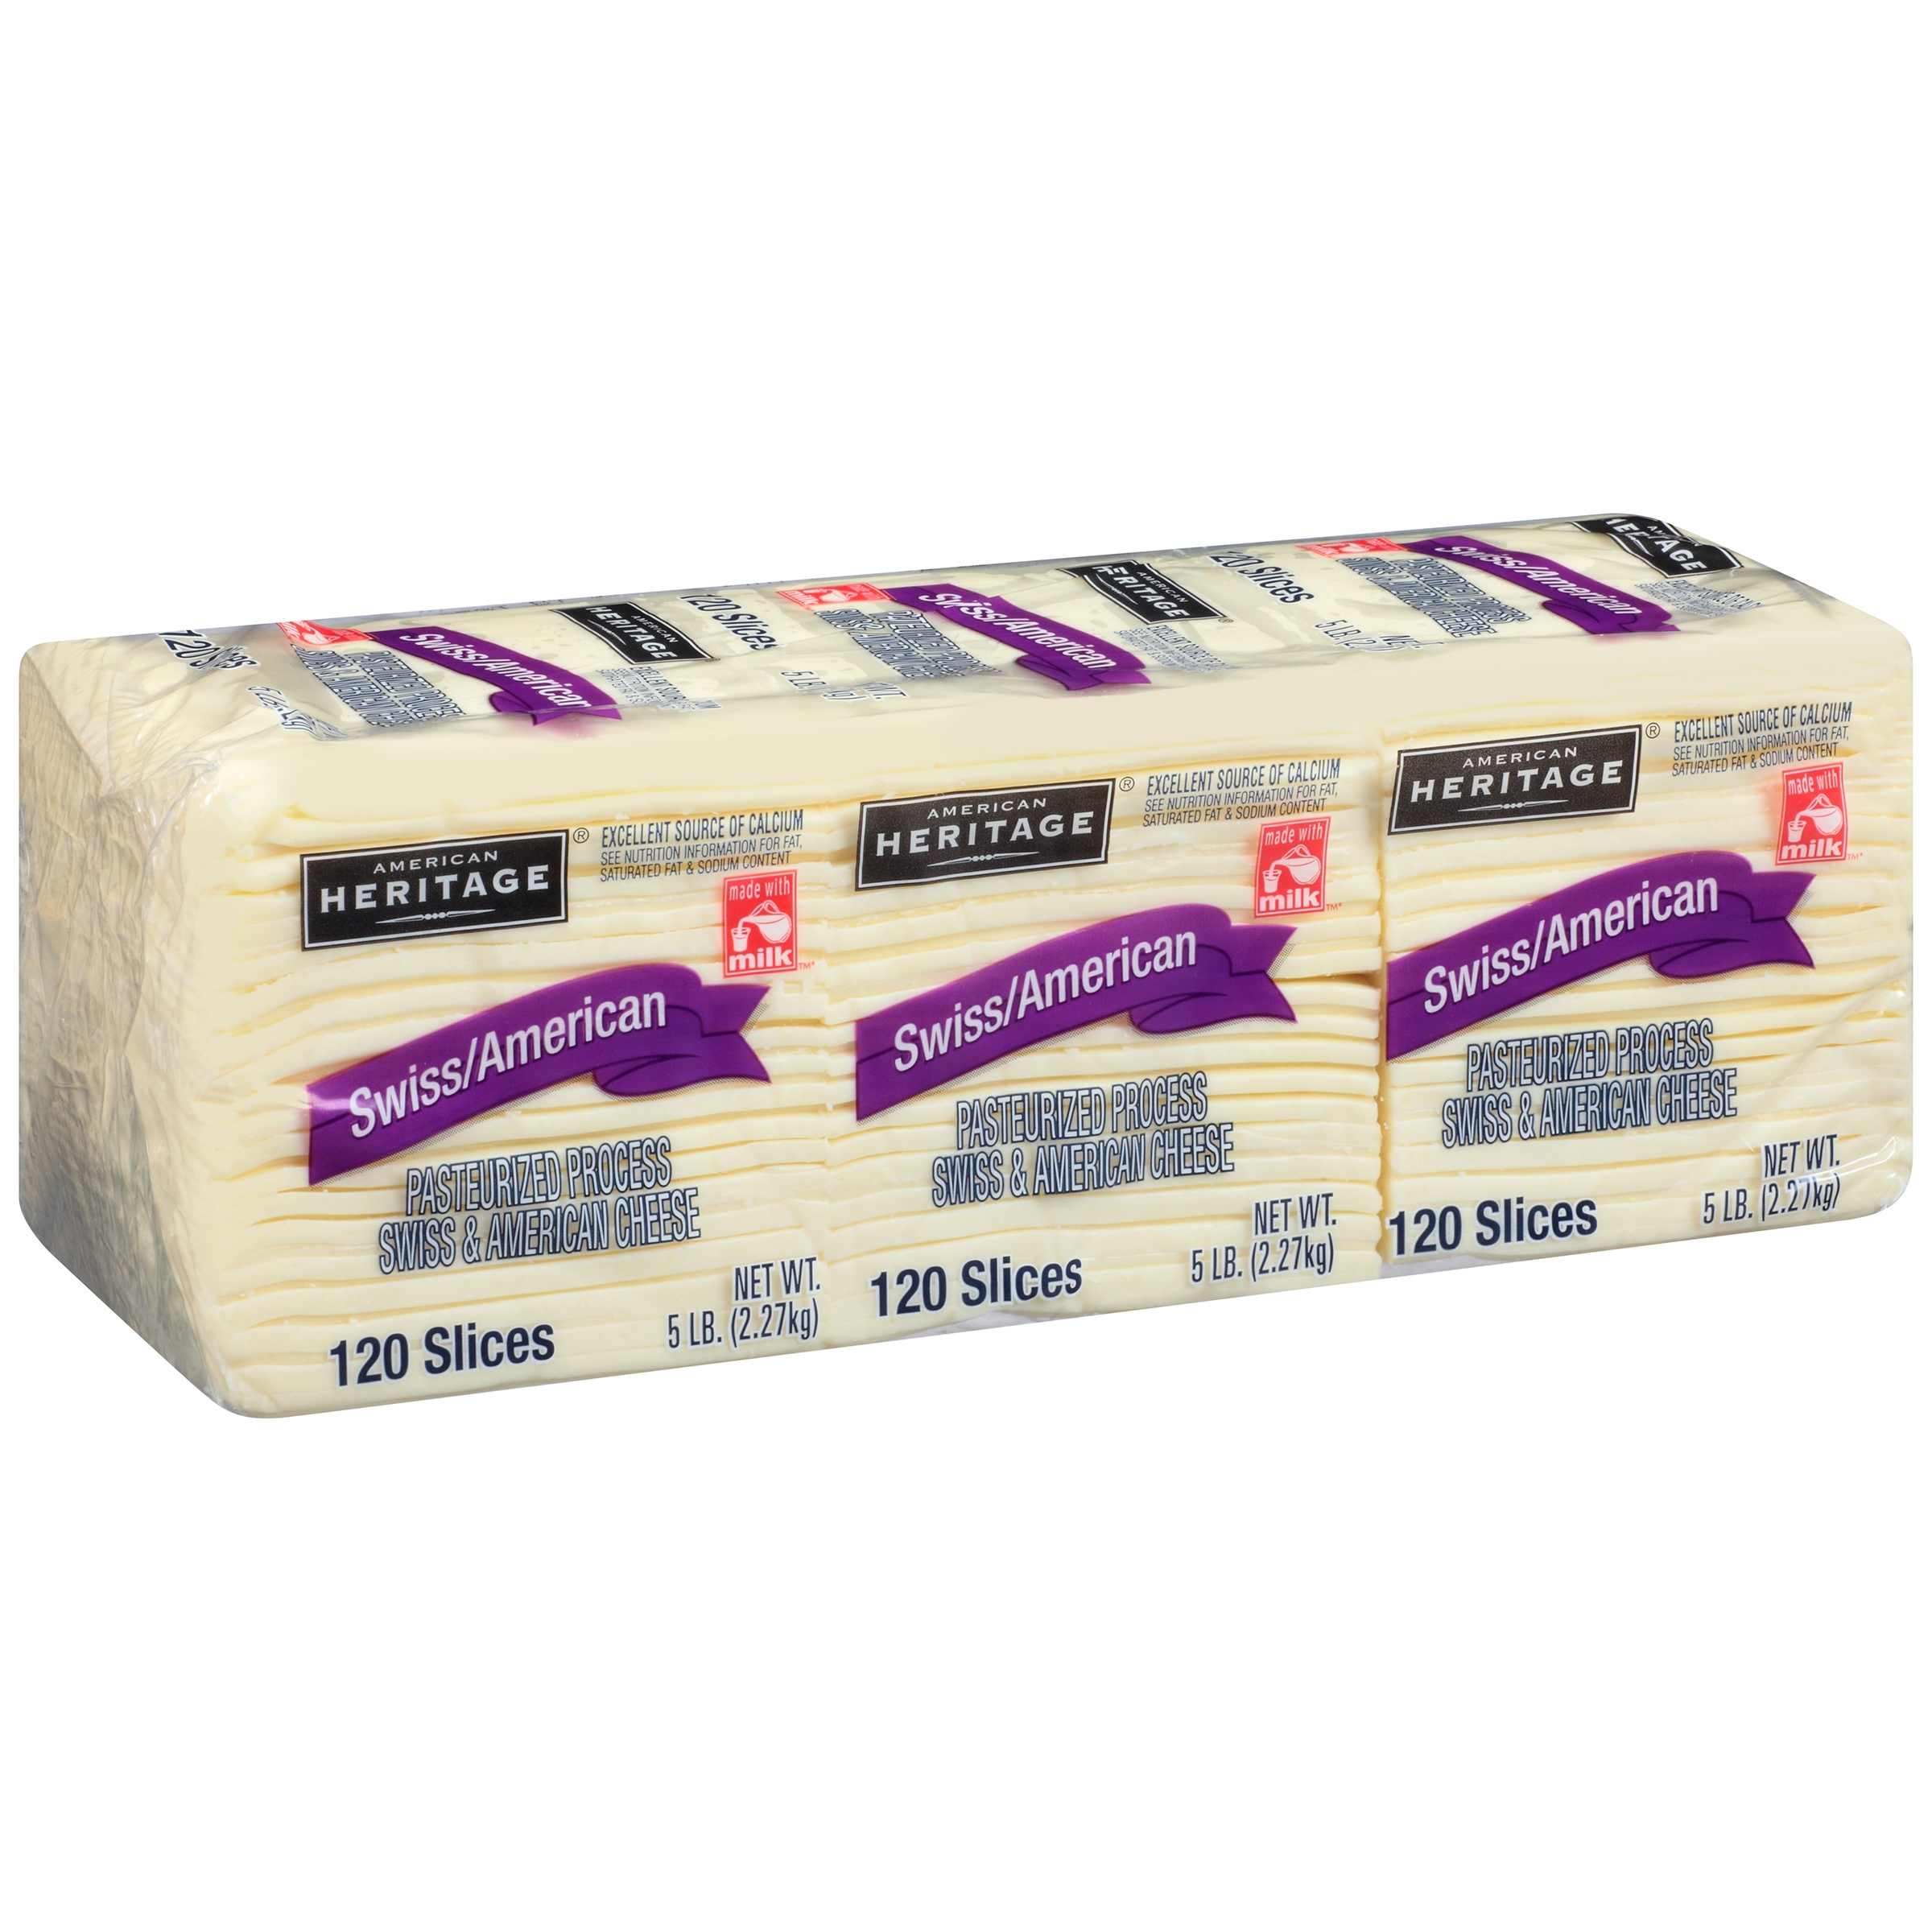 American Heritage Swiss/American Cheese, 5 Lbs., 120 Count - image 1 of 11